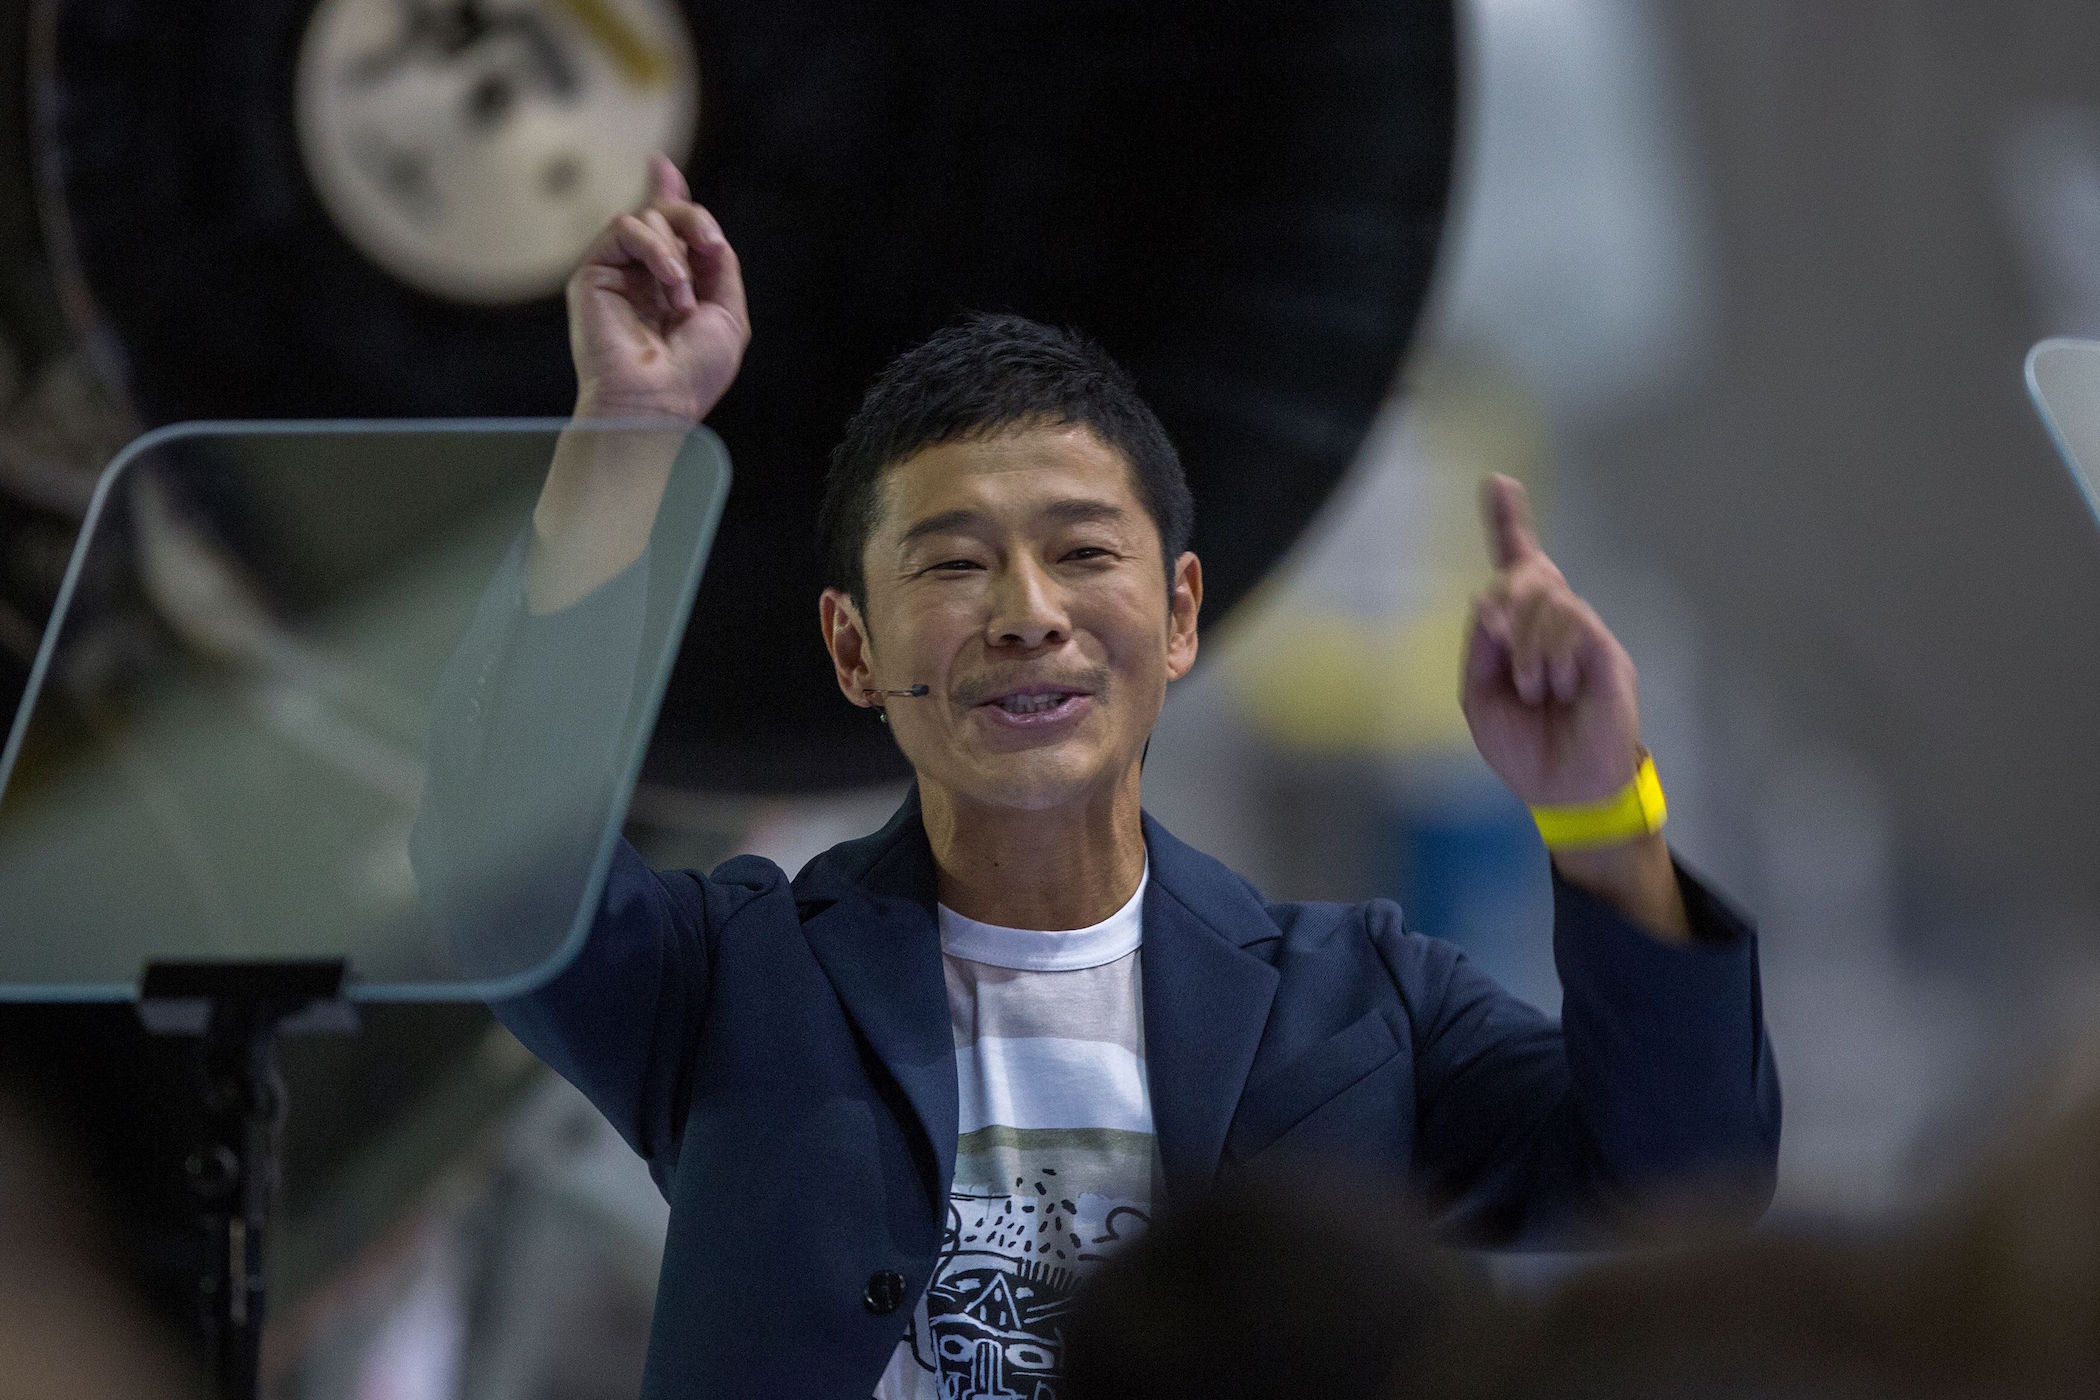 Japanese billionaire Yusaku Maezawa at the SpaceX headquarters and rocket factory on September 17, 2018 in Hawthorne, California. (Photo by DAVID MCNEW/AFP/Getty Images)